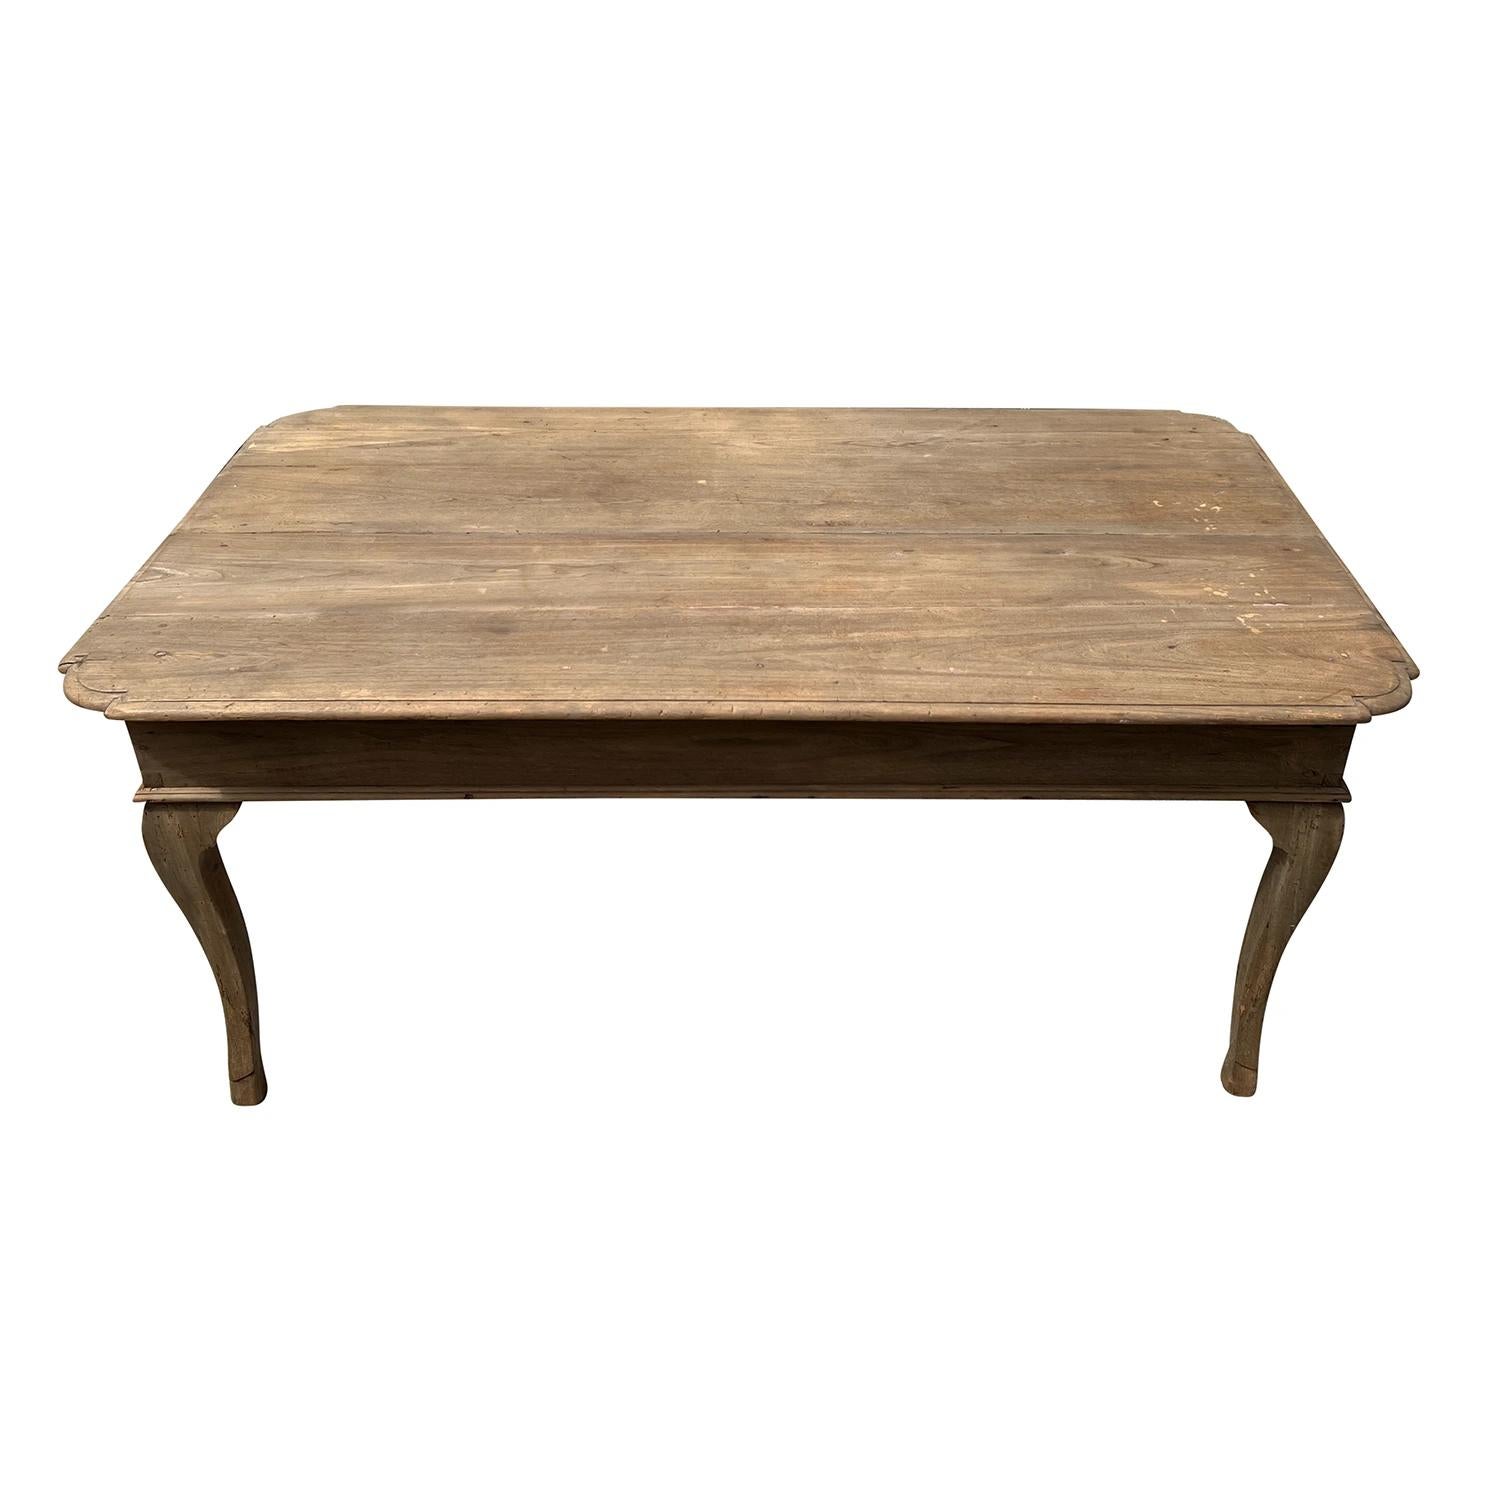 An antique and massive French Provincial dining room table or work table made of hand crafted Fruitwood, in good condition. The detailed top of the early 19th Century farm table is made of planks. Beautiful aged and distressed patina on the wood